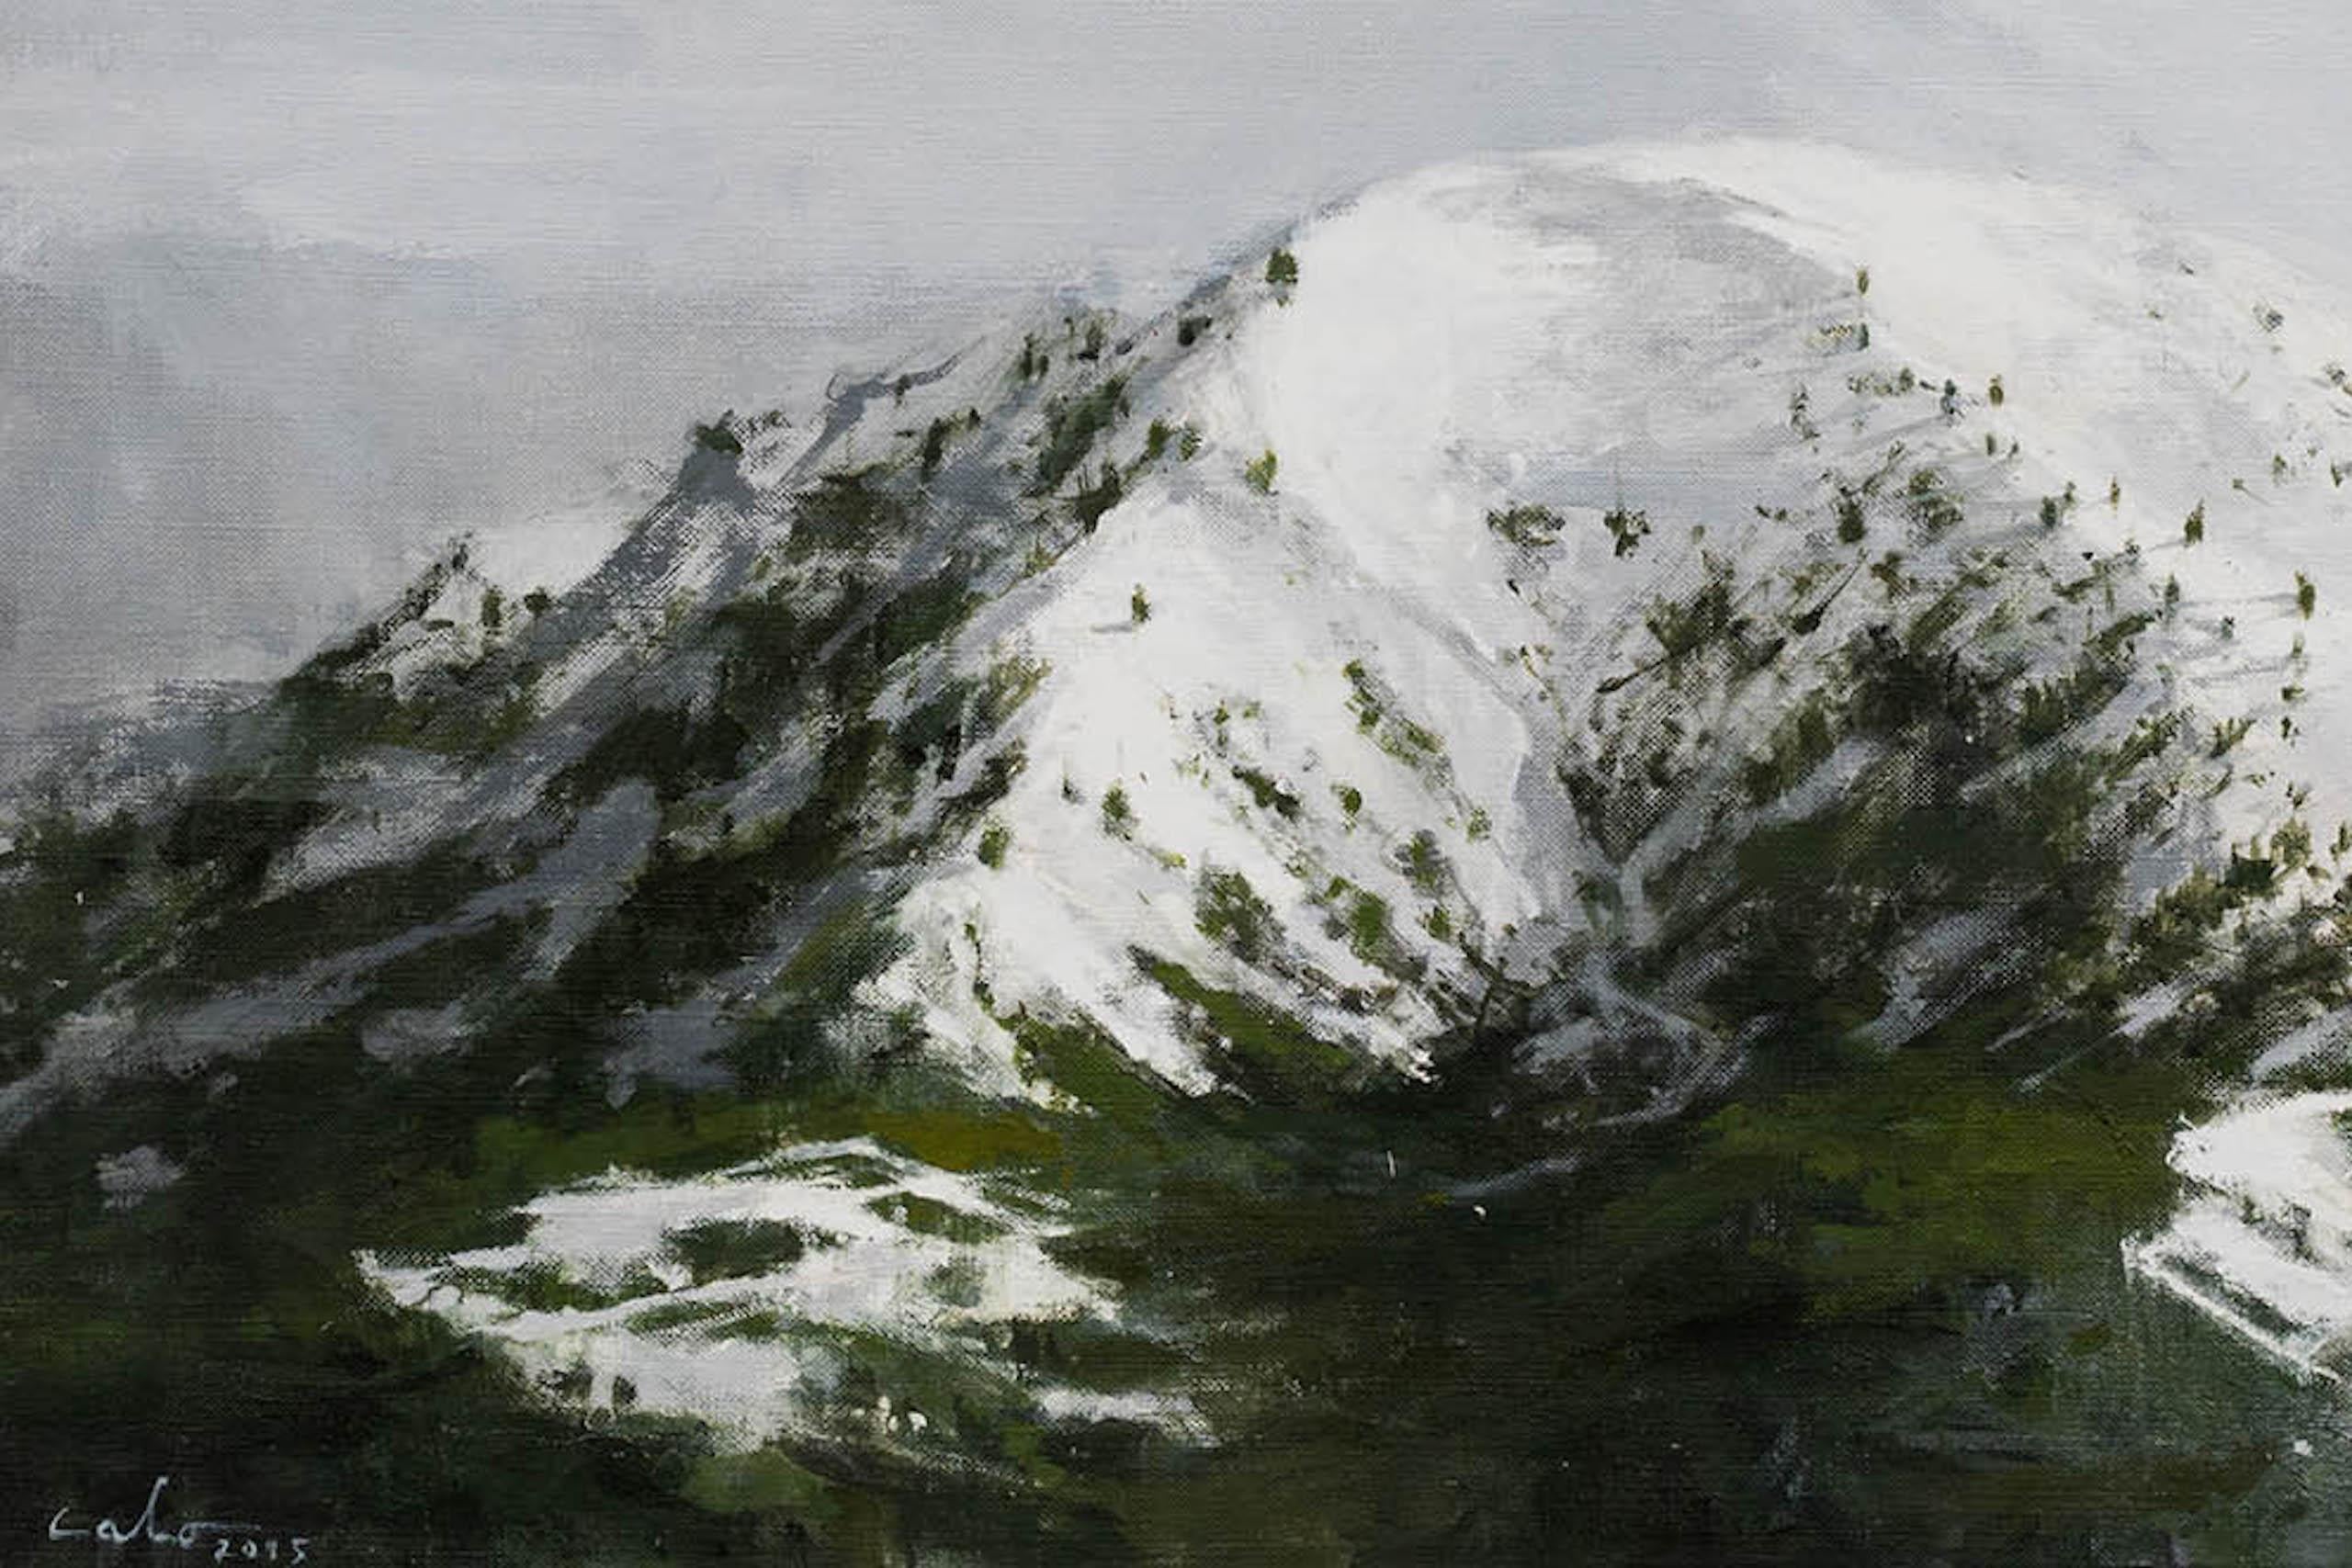 Pre-Pyrenees N1 by Calo Carratalá - Landscape painting, snowy mountain, winter For Sale 3